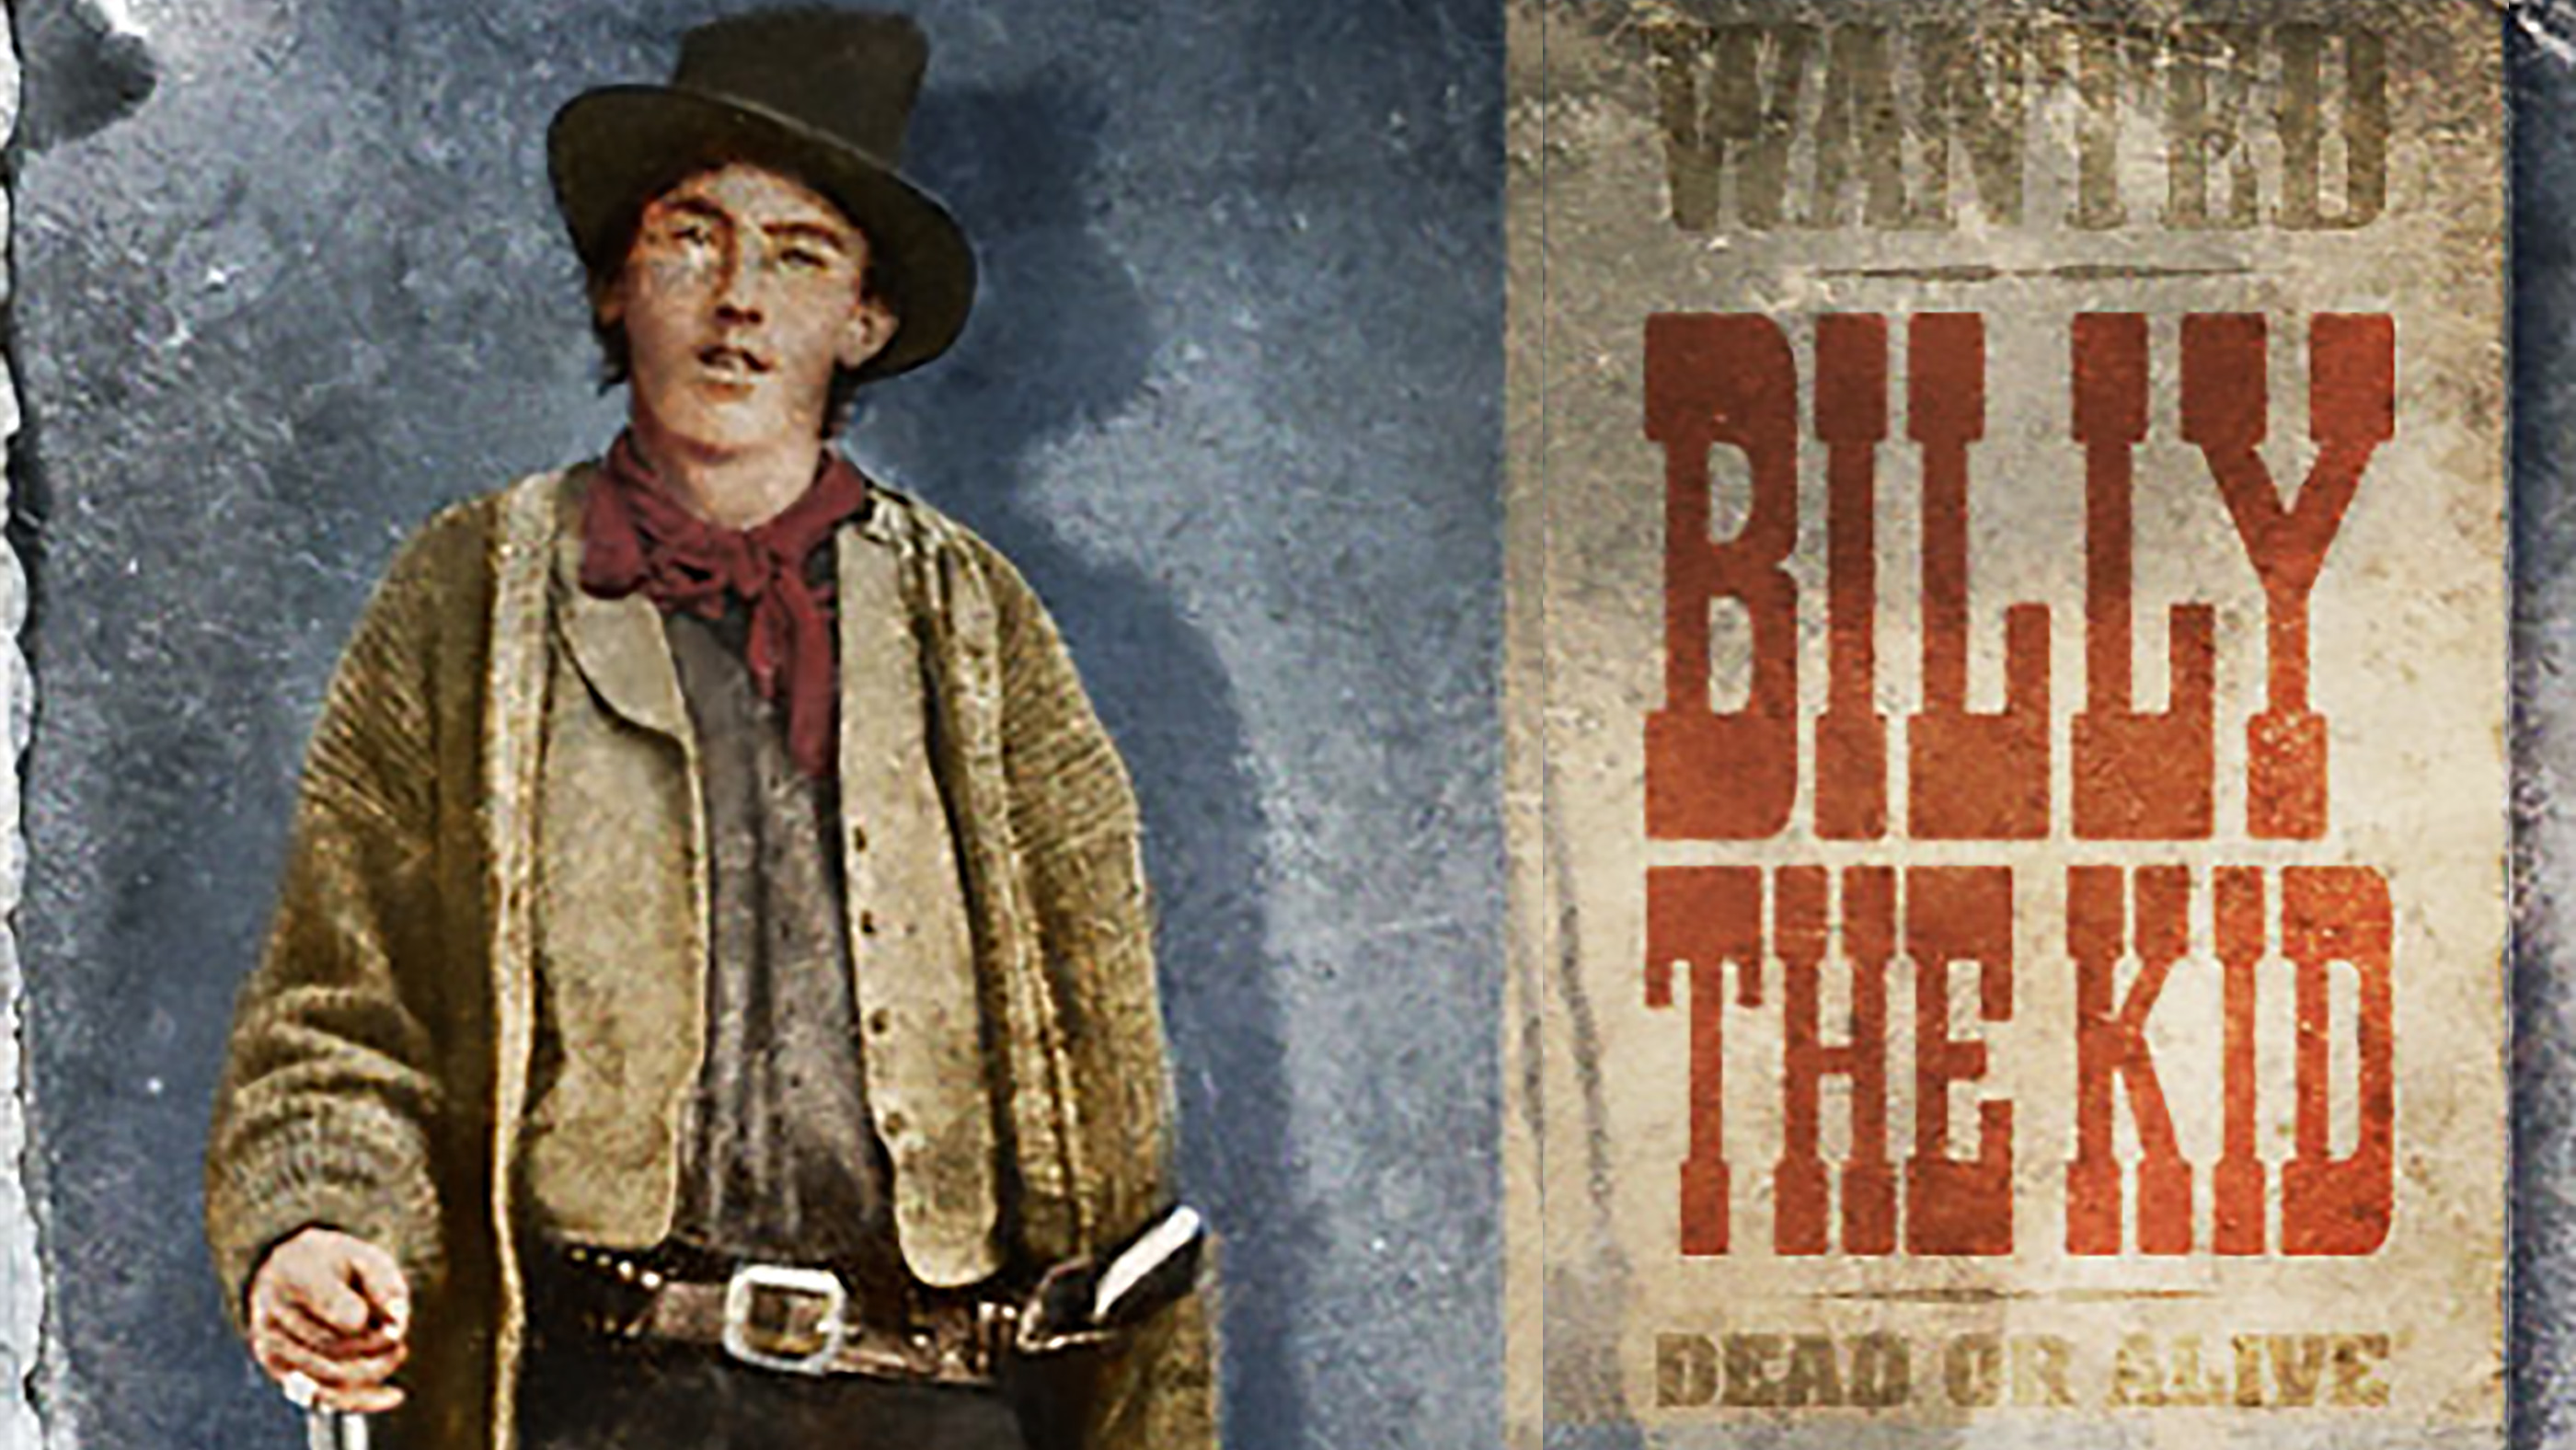 On This Day in 1881, Billy the Kid cheats the hangman.